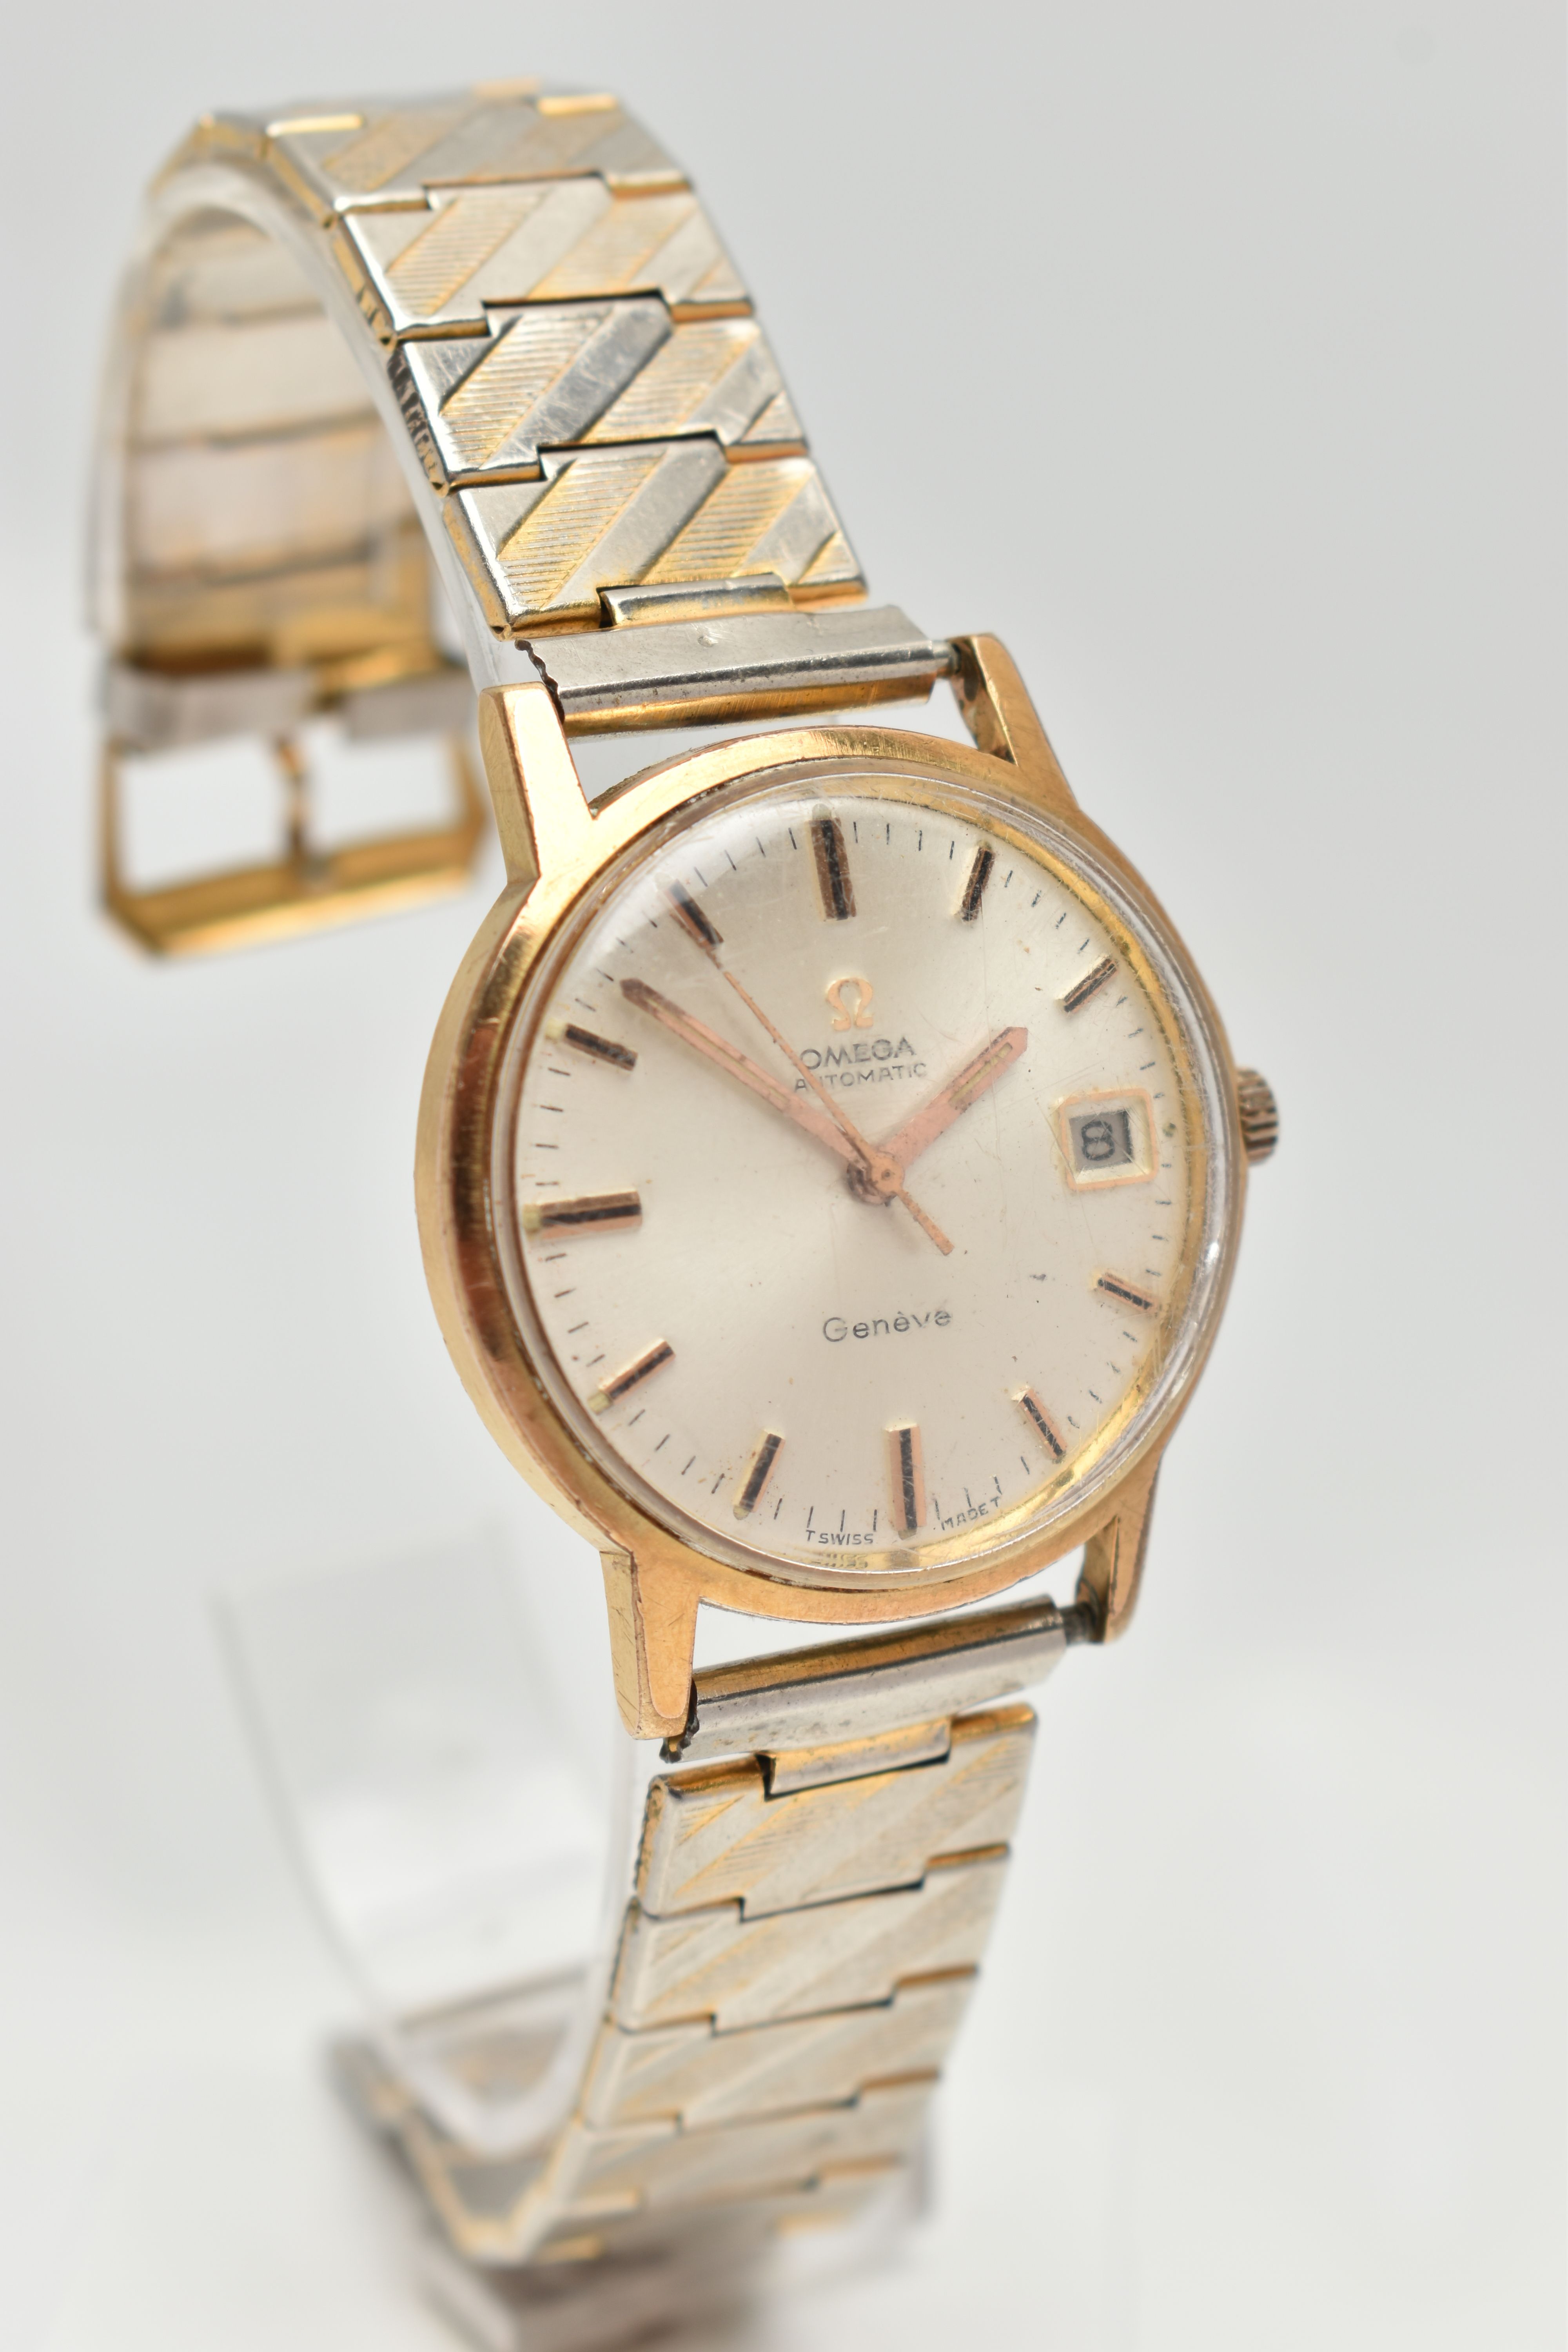 AN ‘OMEGA’ WRISTWATCH, automatic movement, round dial signed ‘Omega’ automatic Geneve, baton - Image 2 of 5